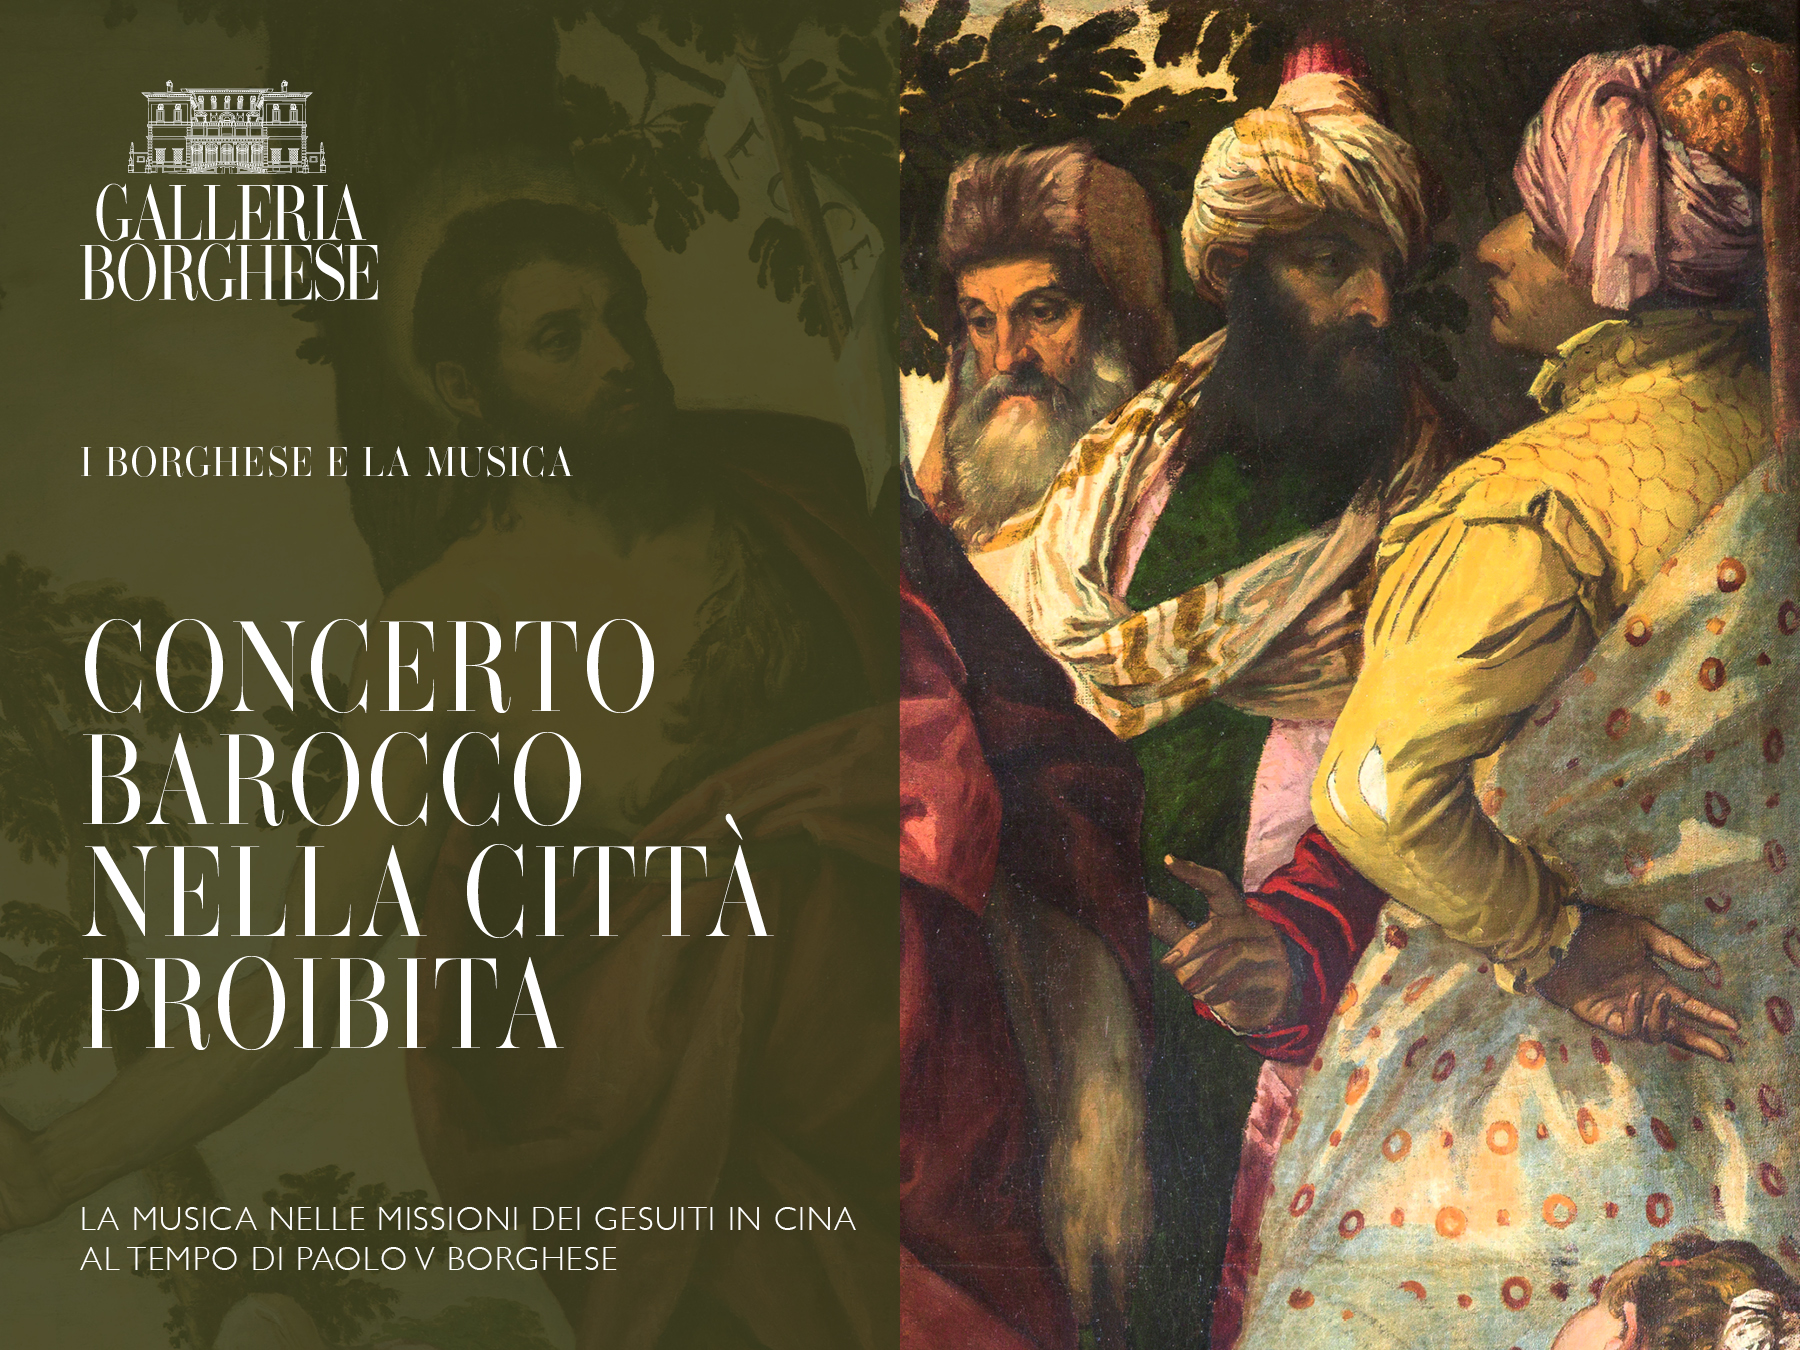 SATURDAY 21 ST MAY – BAROQUE CONCERT IN THE FORBIDDEN CITY. MUSIC IN THE JESUIT MISSION IN CHINA AT THE TIME OF PAOLO V BORGHESE